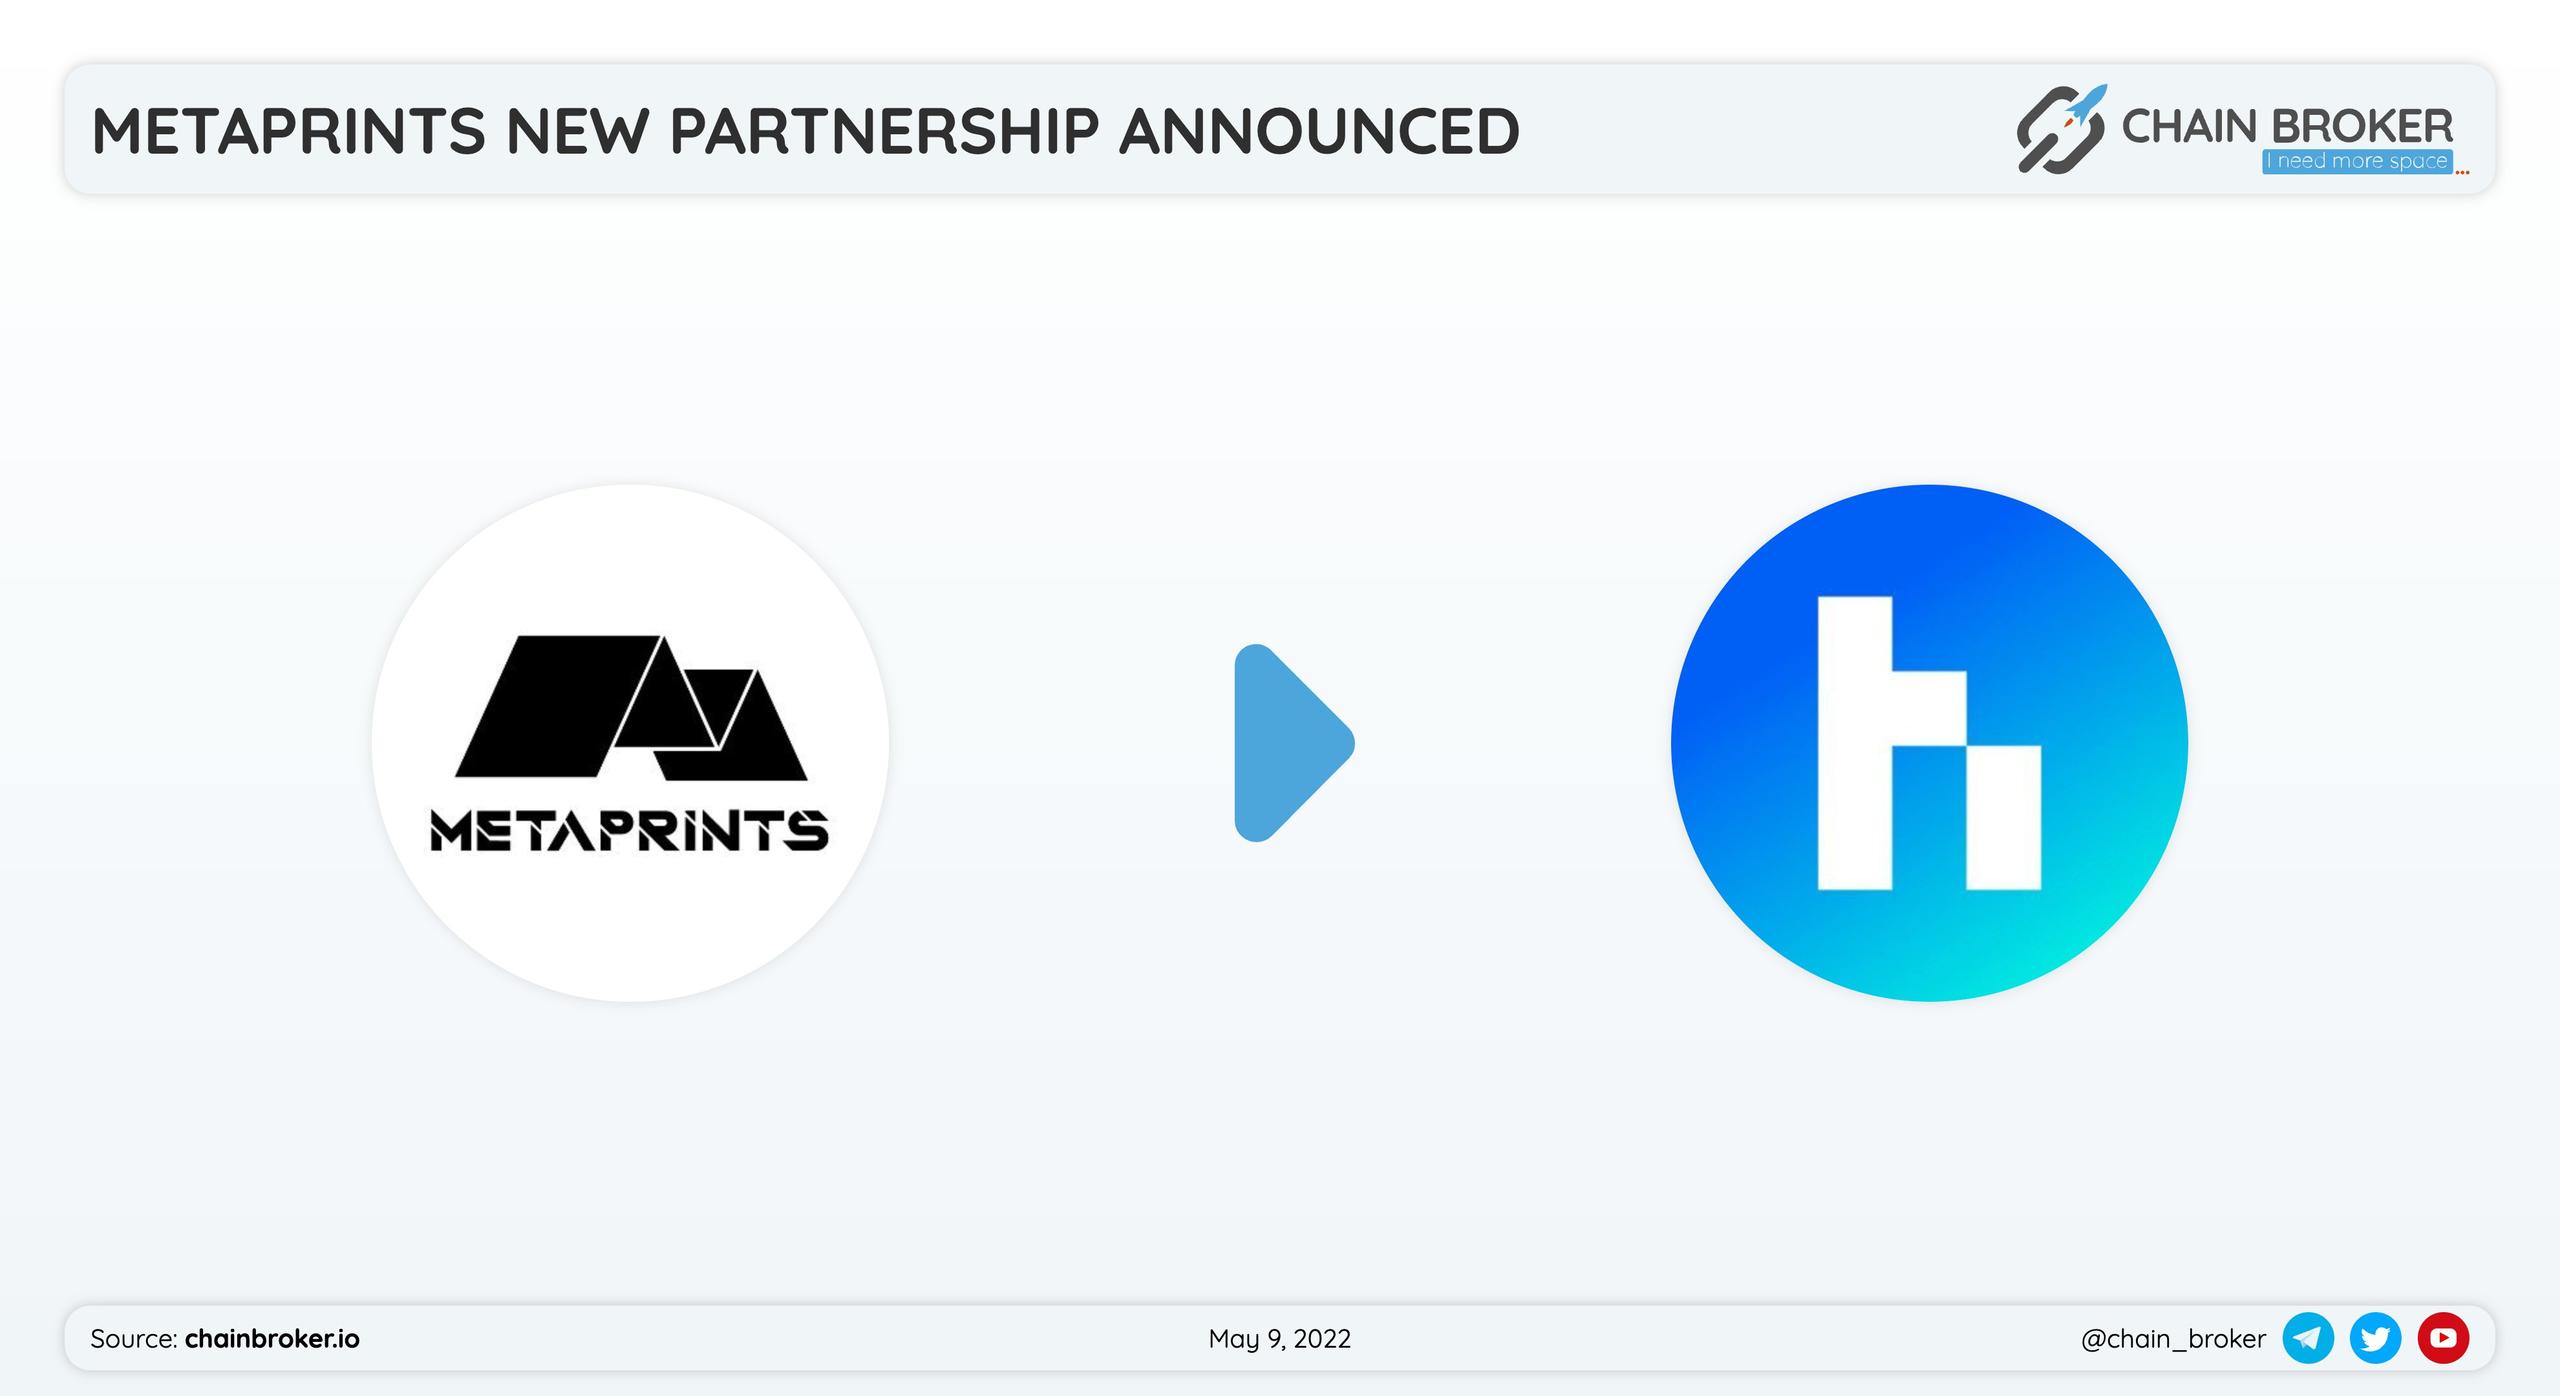 Metaprints partnered with Highstreet